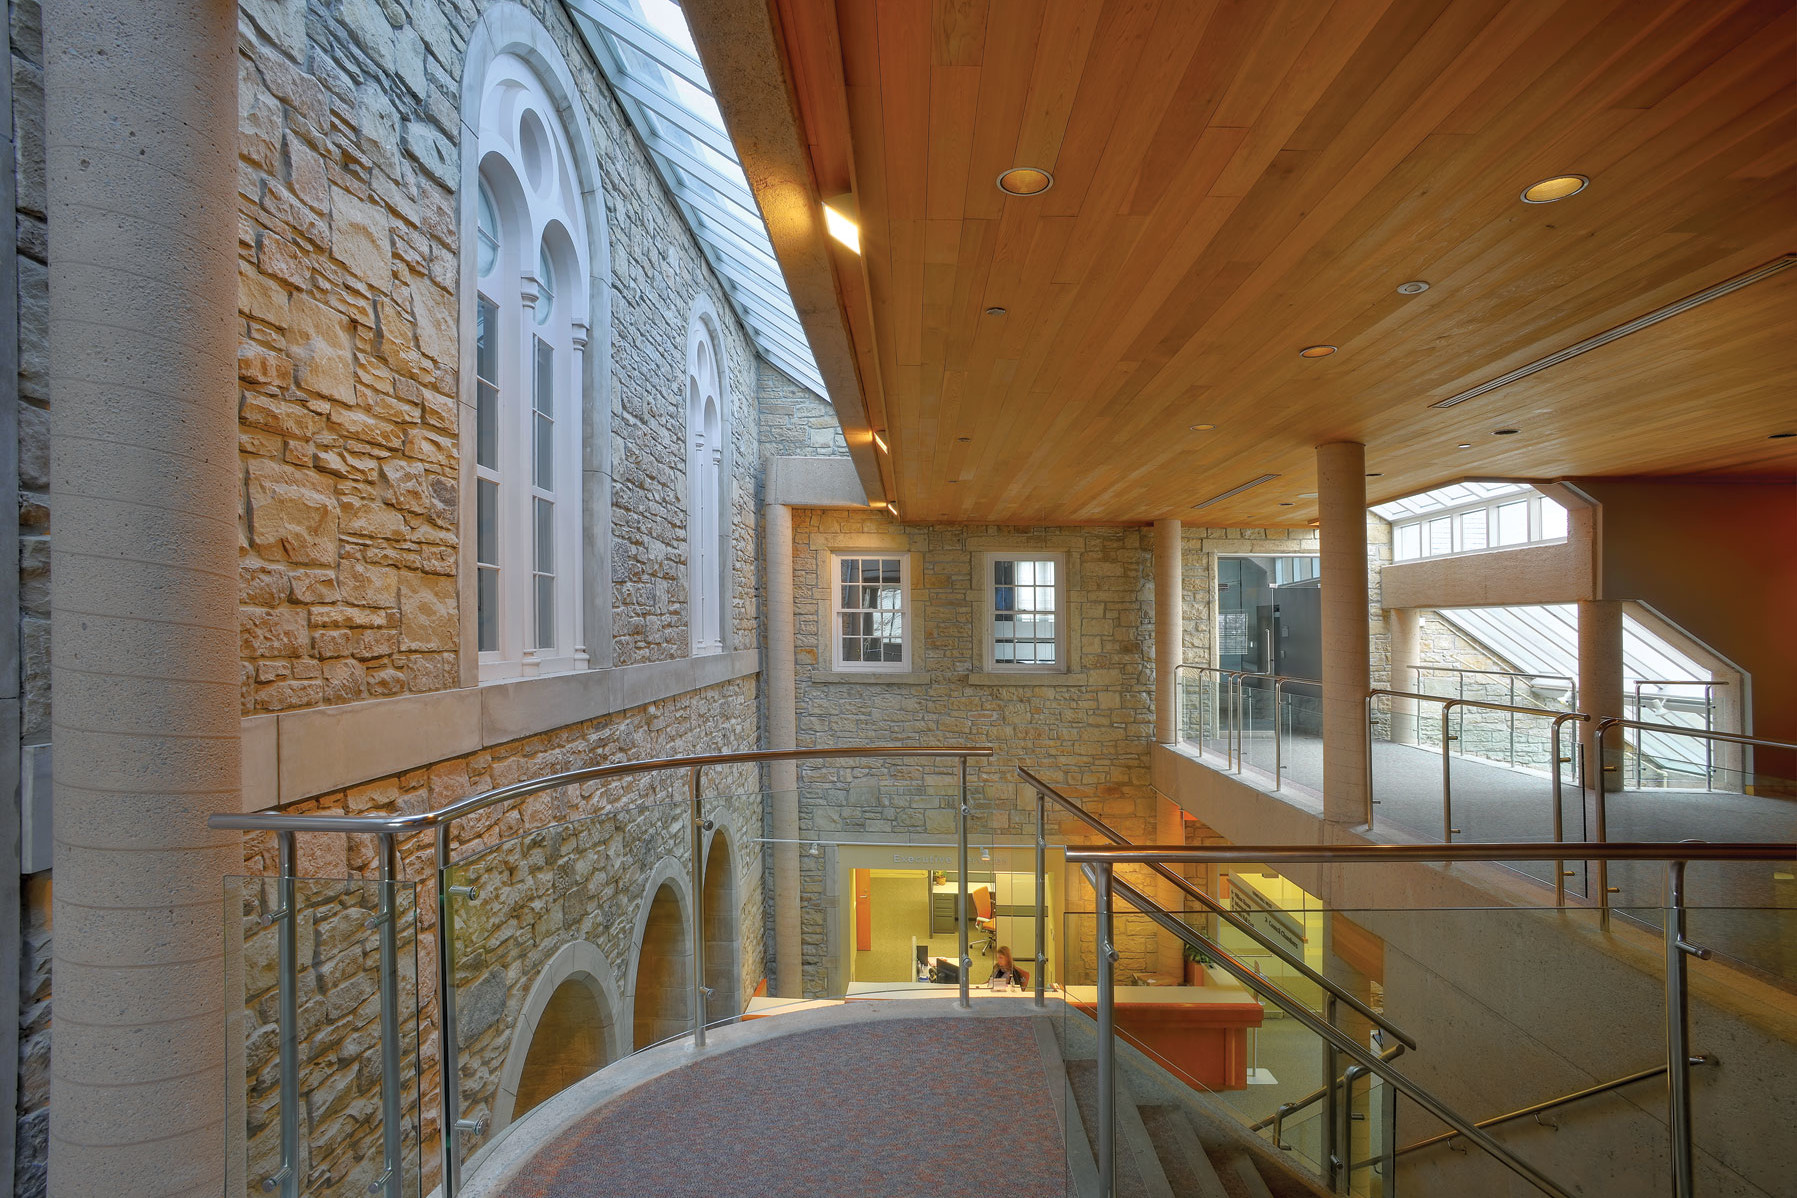 Original stone façade with arched windows connecting to addition with clerestory windows, wood plank ceiling, exposed columns and staircase